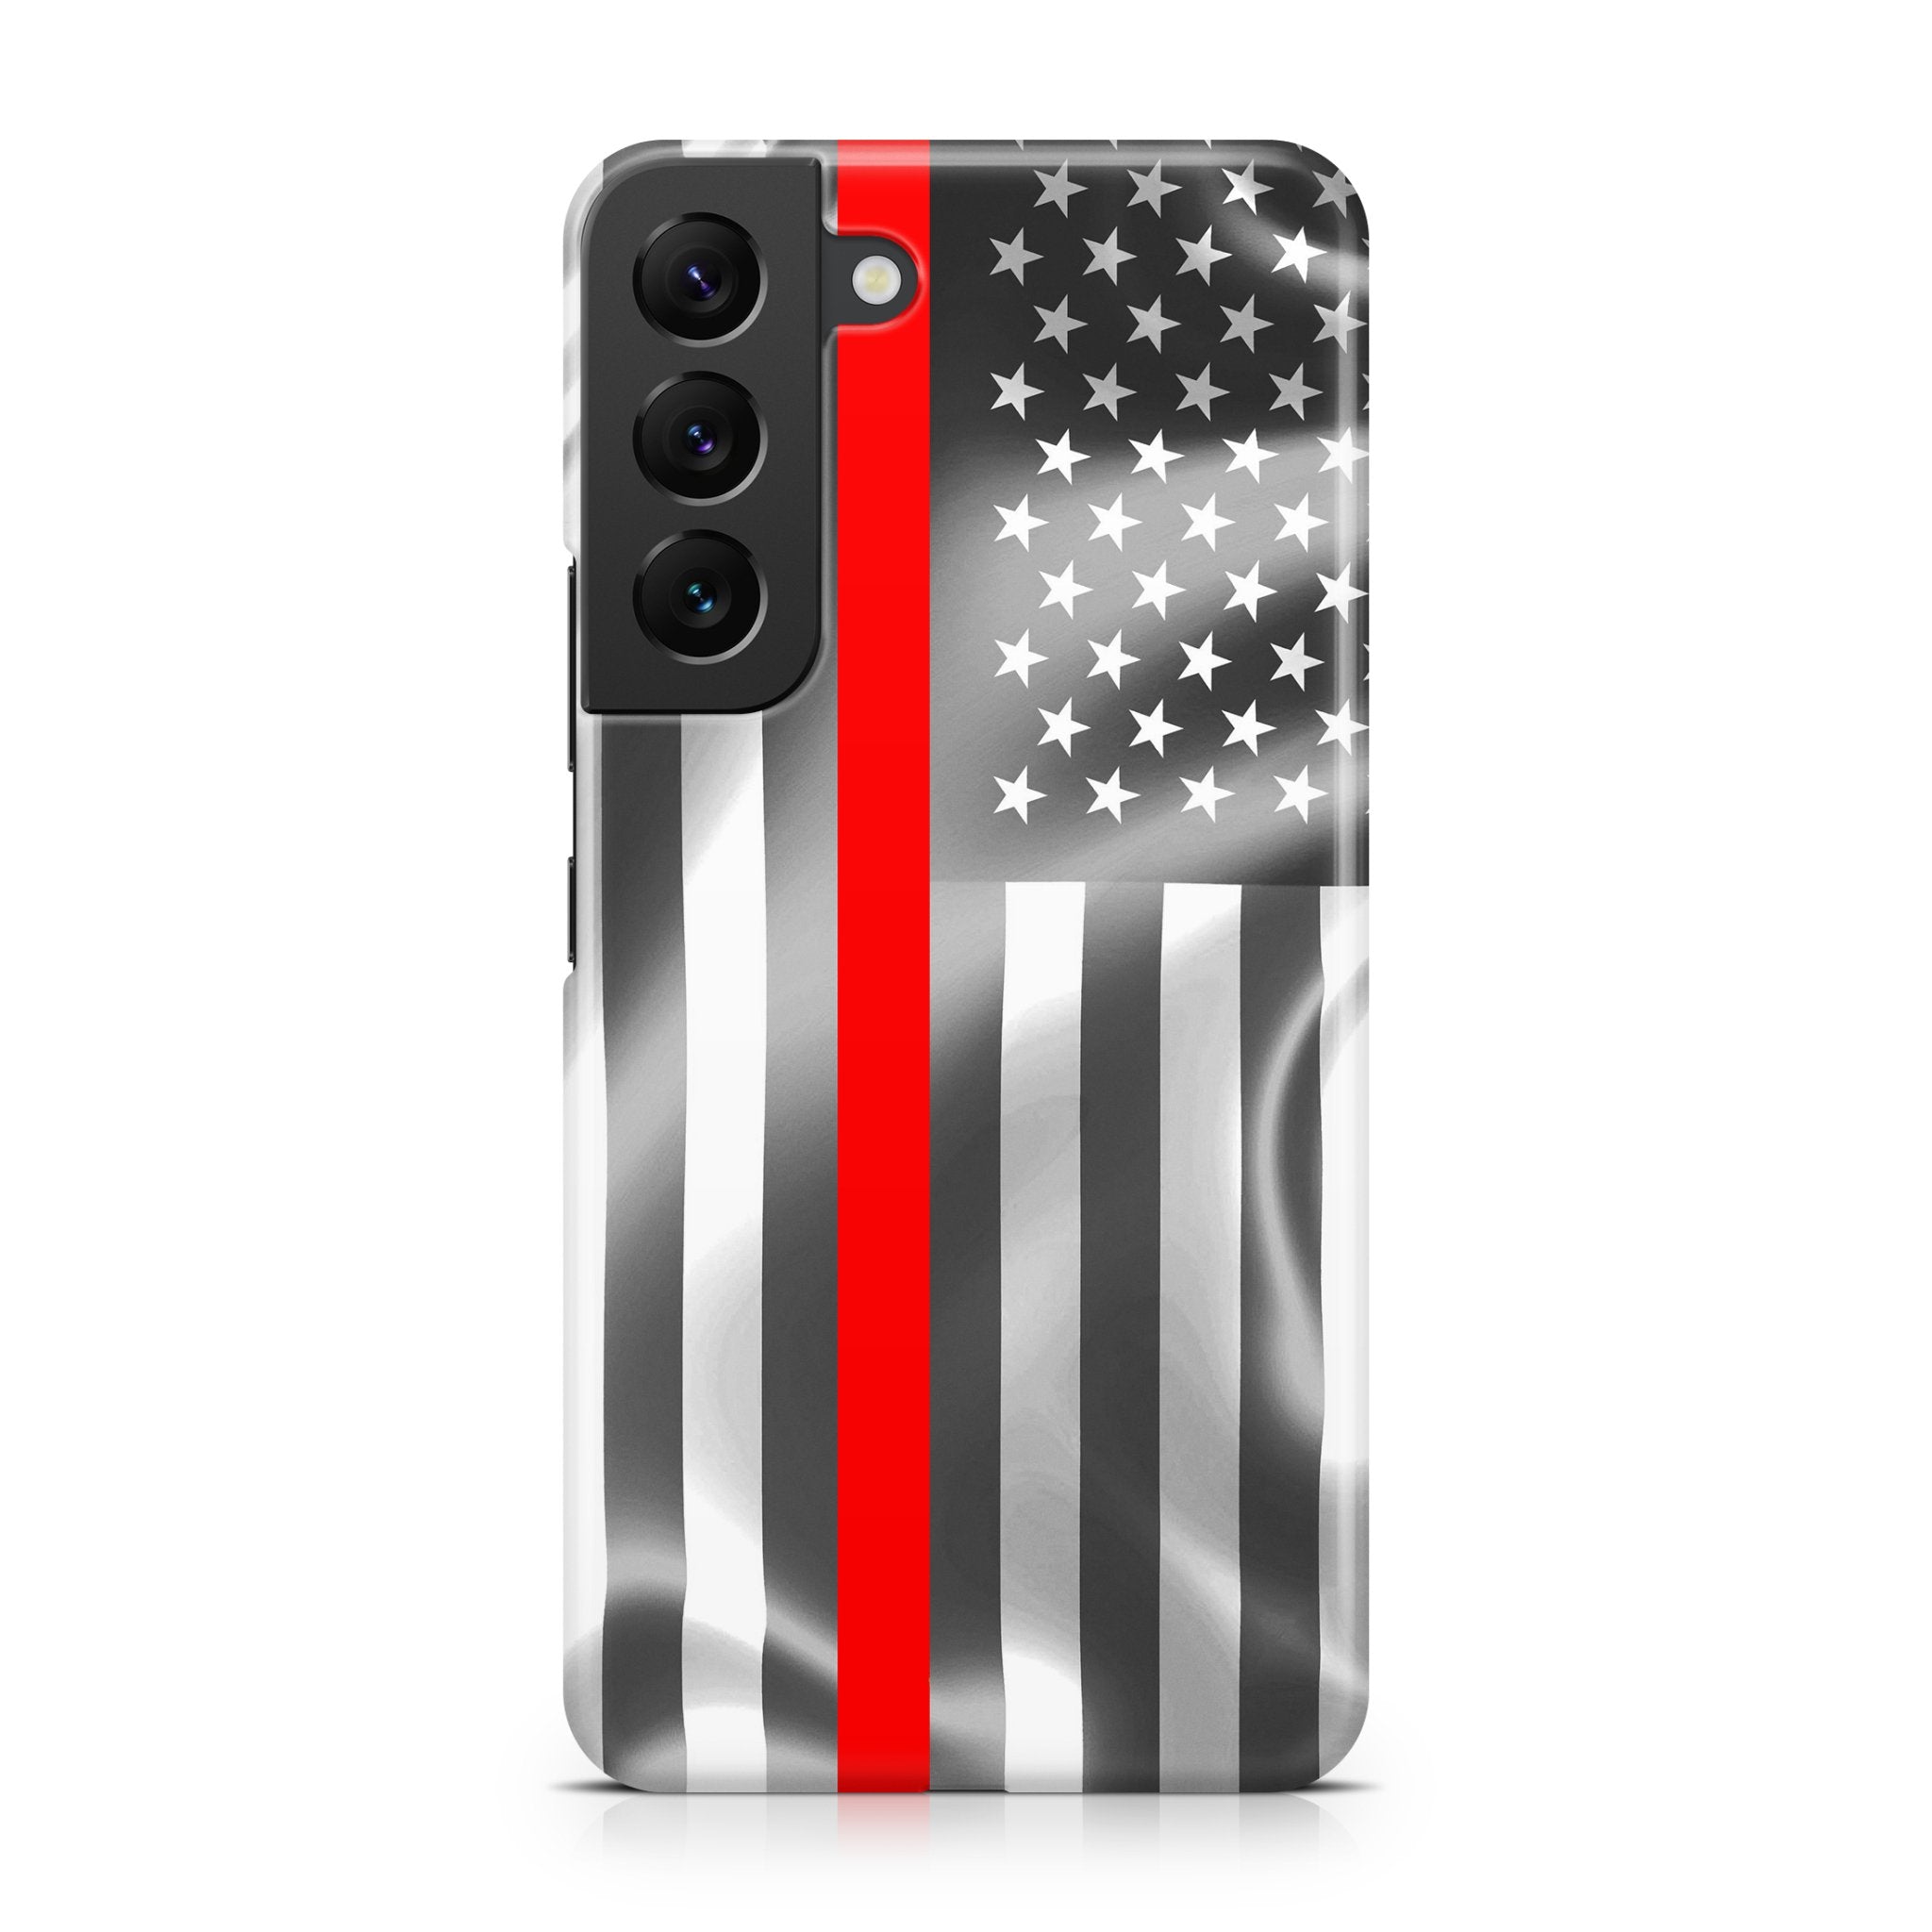 Thin Red Line - Samsung phone case designs by CaseSwagger